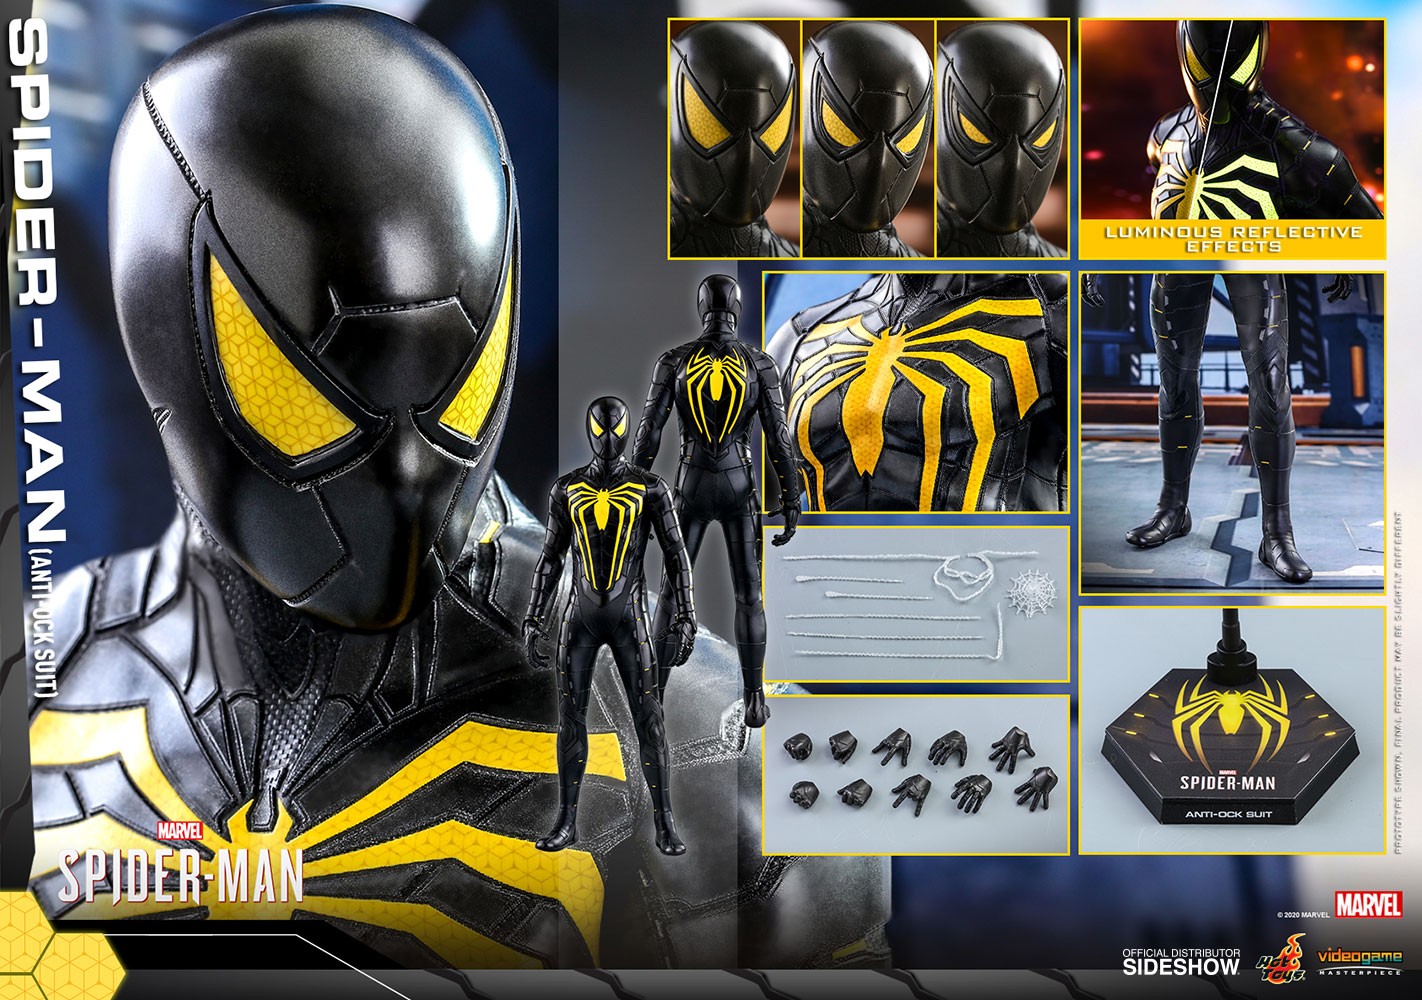 Spider-Man (Anti-Ock Suit) Collector Edition (Prototype Shown) View 13